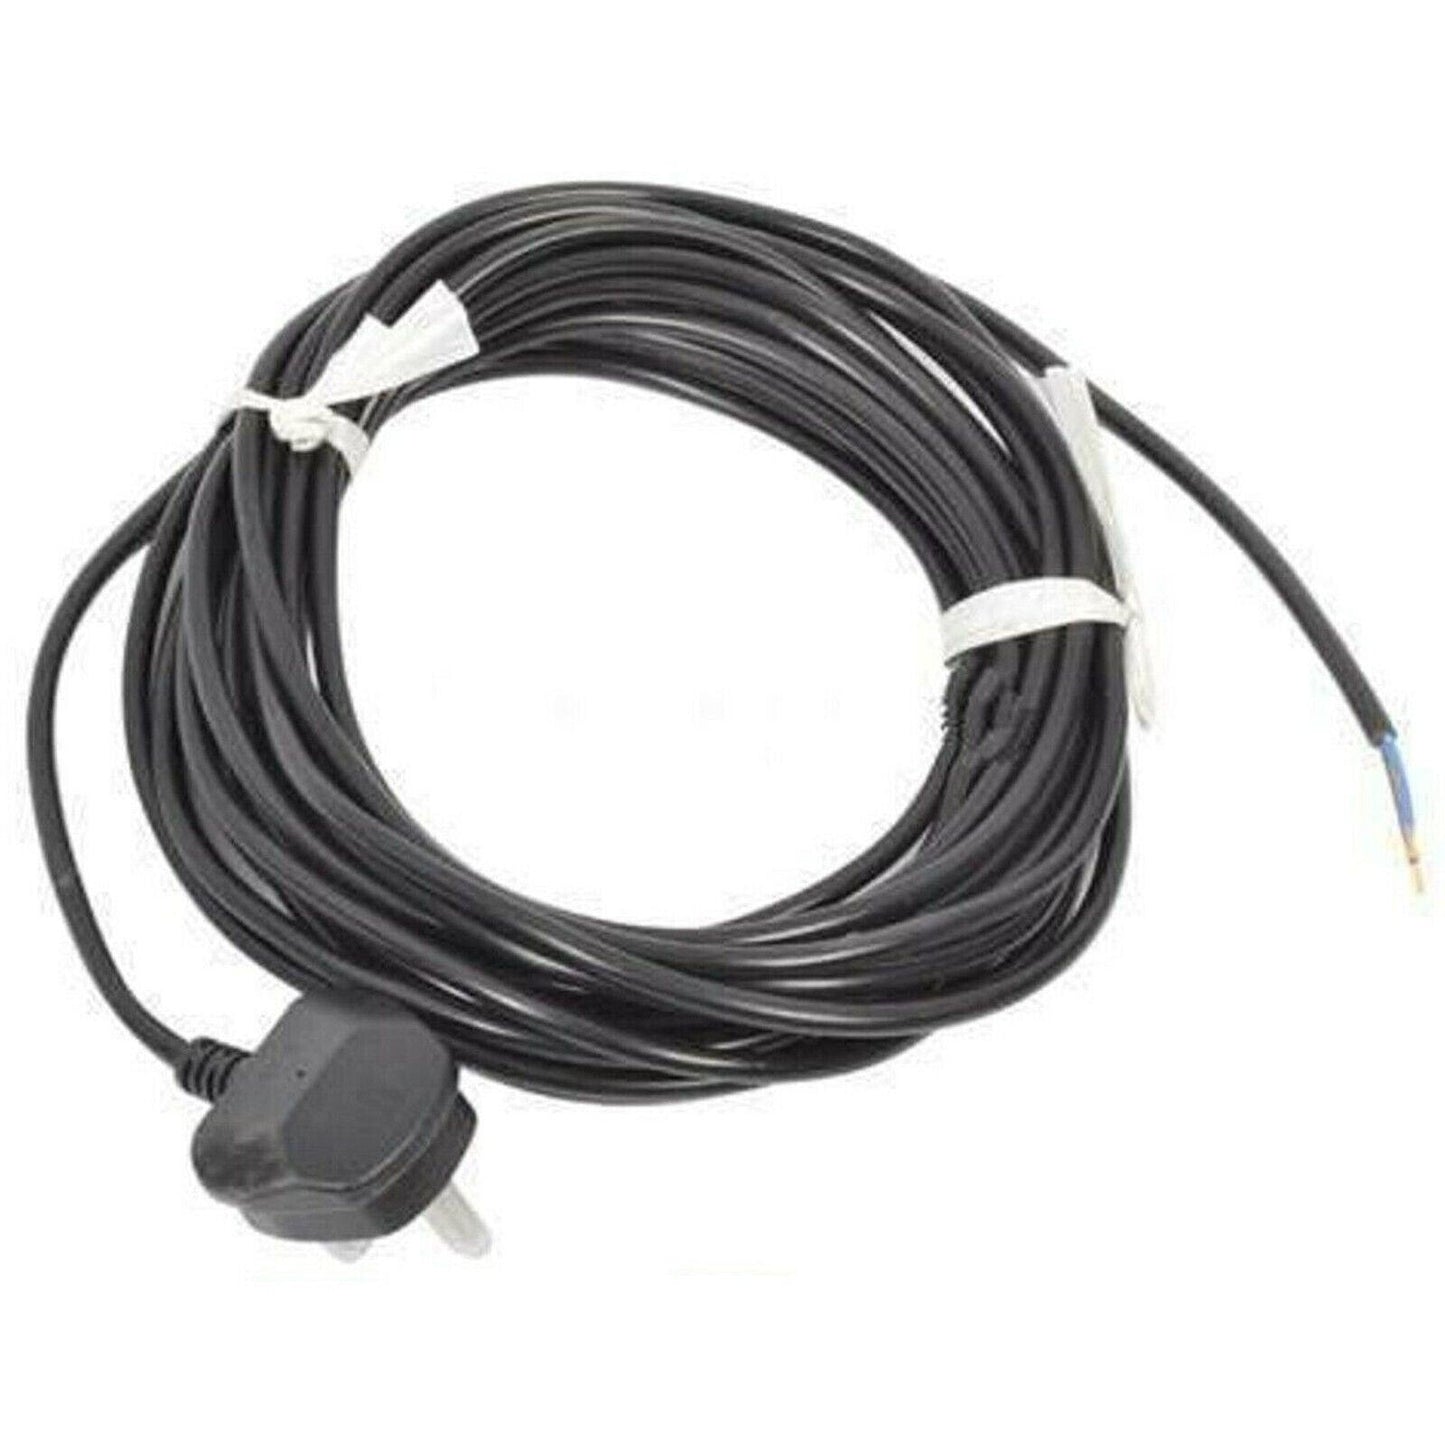 Power Cable for Numatic Henry Hetty Vacuum Cleaner - Vacuum Cleaner Clinic 